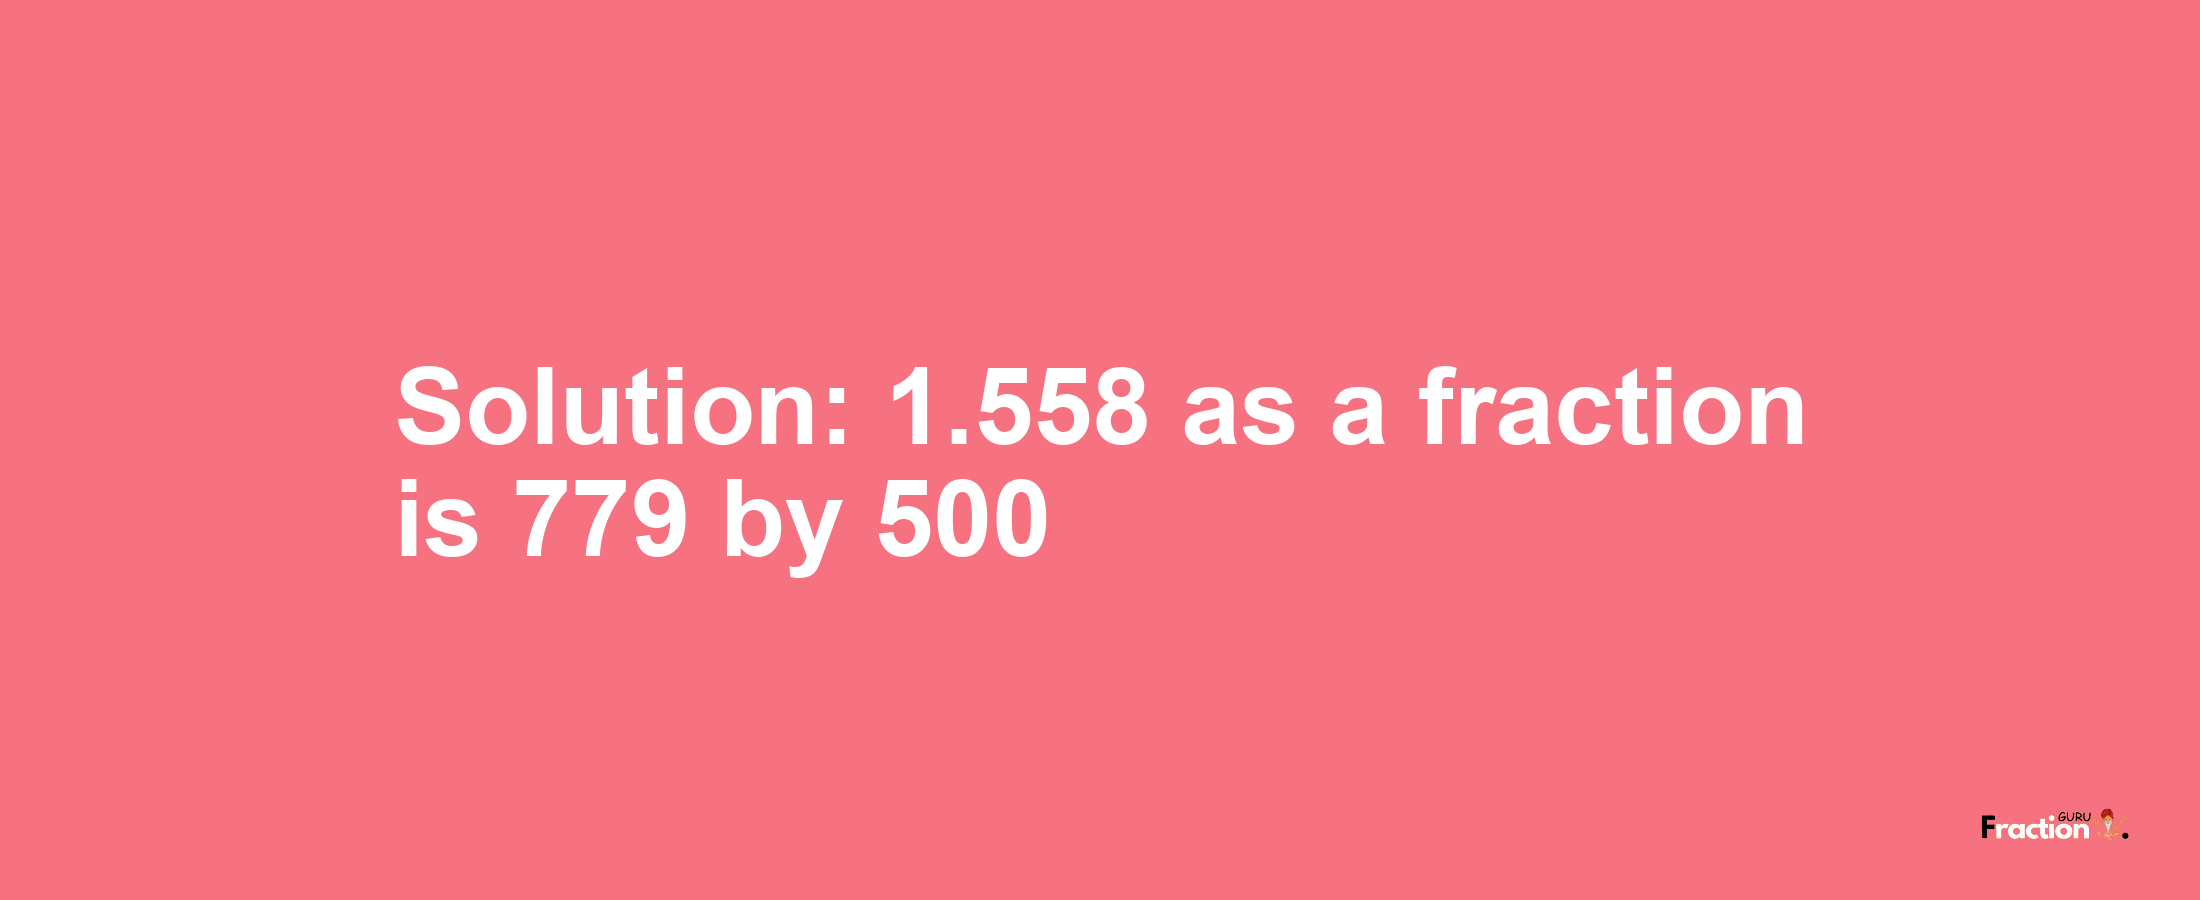 Solution:1.558 as a fraction is 779/500